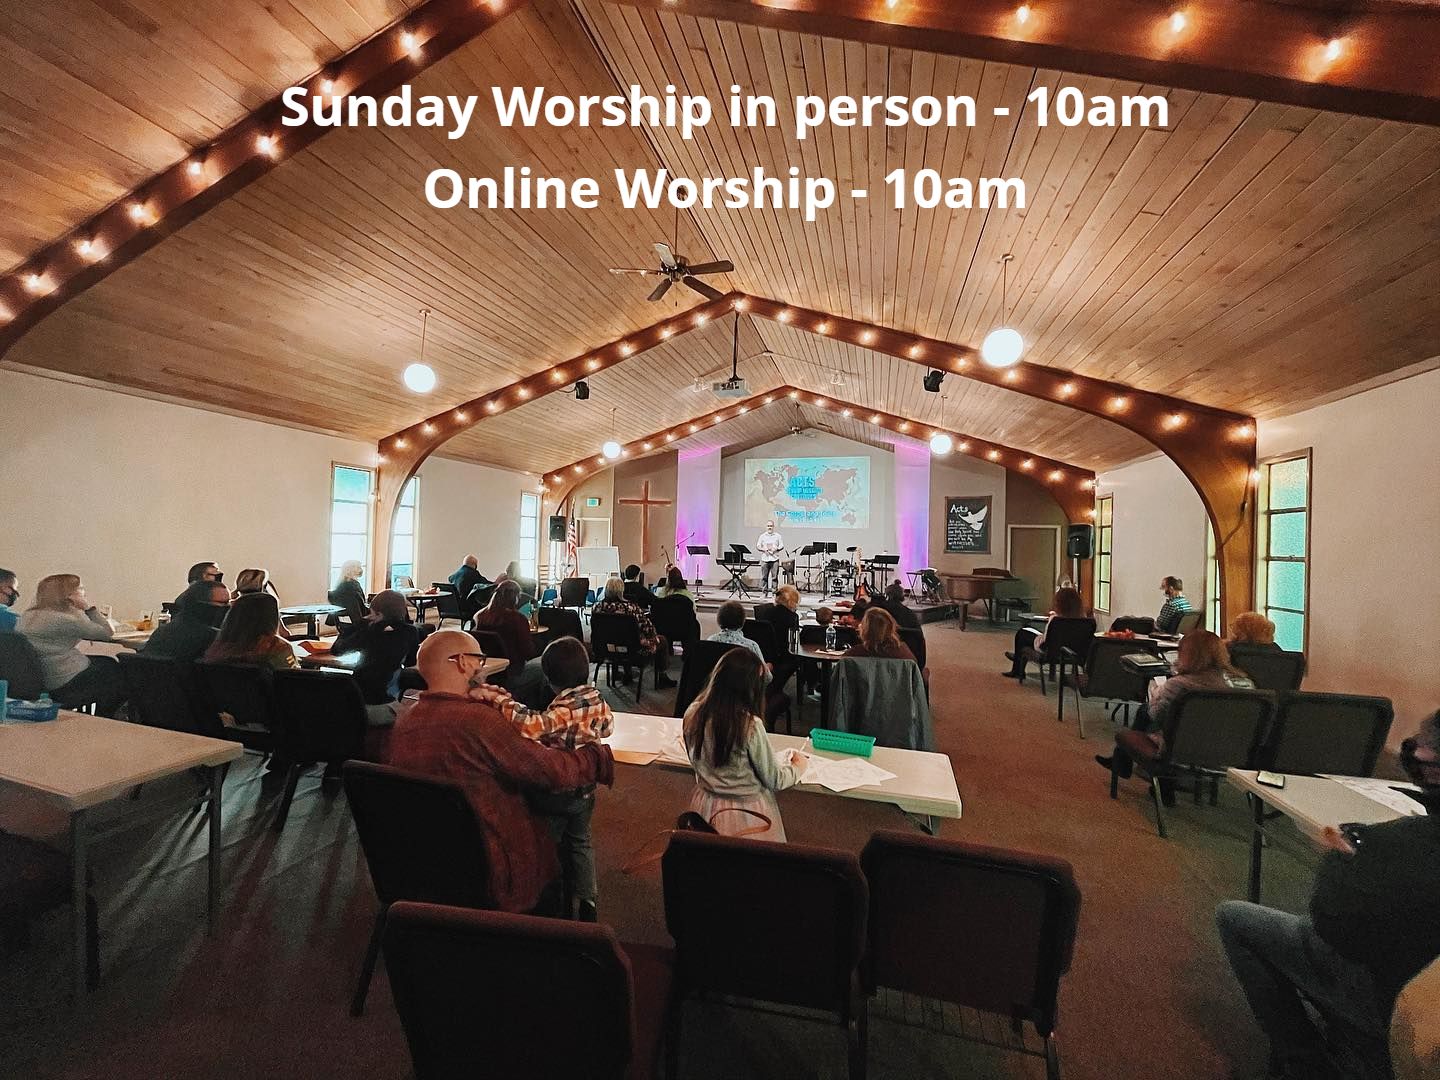 Sunday Worship in person - 10am
Online Worship - 10am 